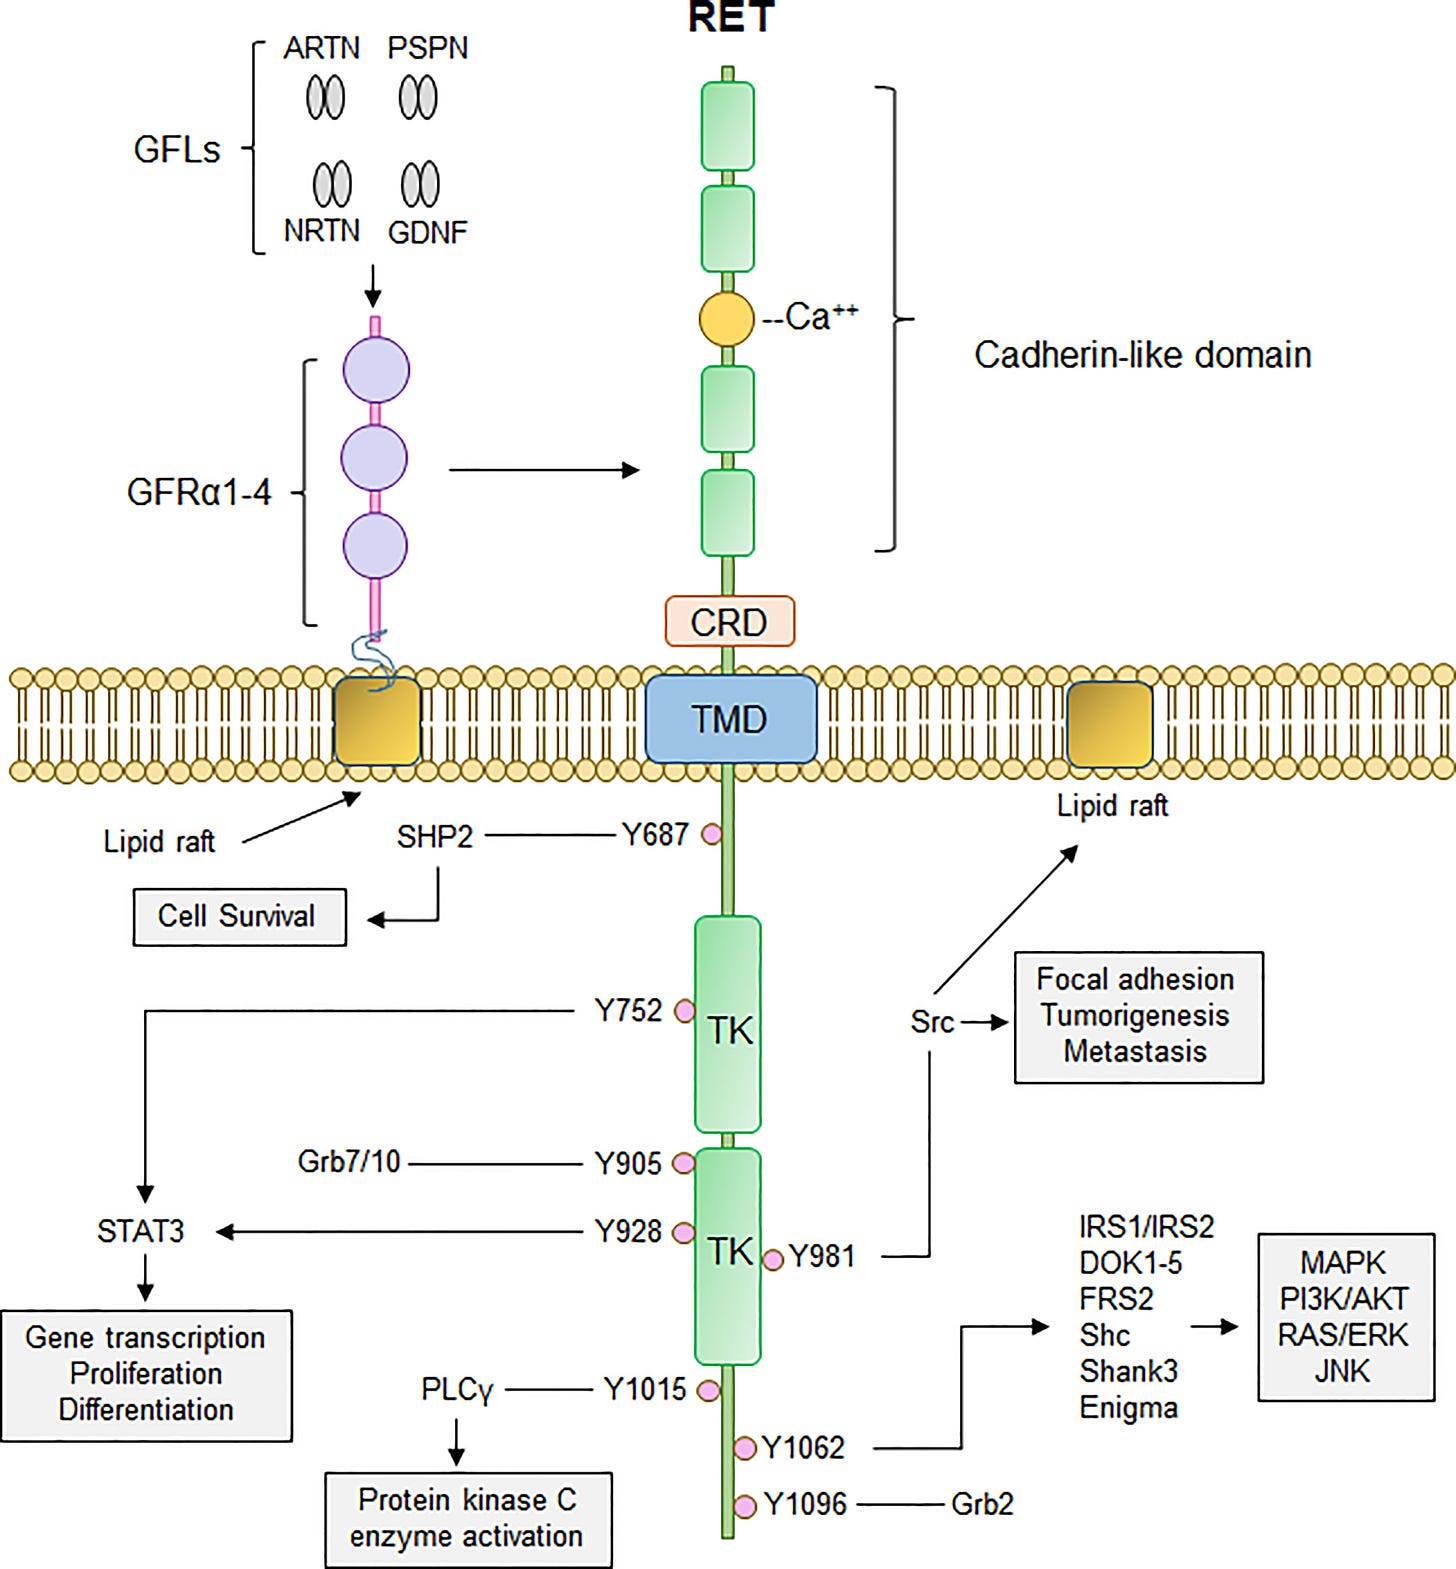 Frontiers | RET signaling pathway and RET inhibitors in human cancer